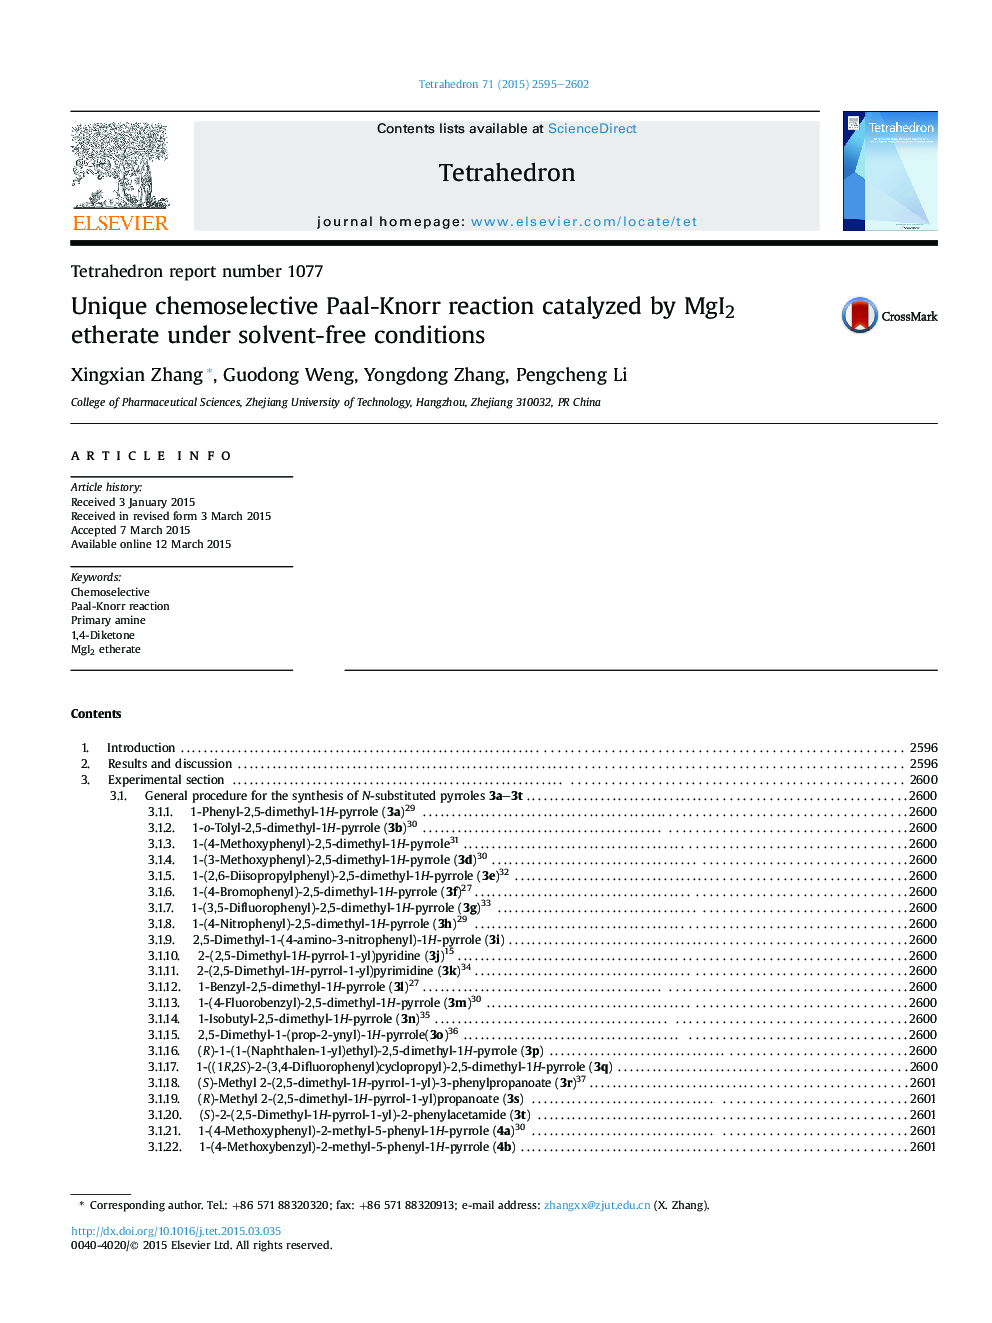 Tetrahedron report number 1077Unique chemoselective Paal-Knorr reaction catalyzed by MgI2 etherate under solvent-free conditions